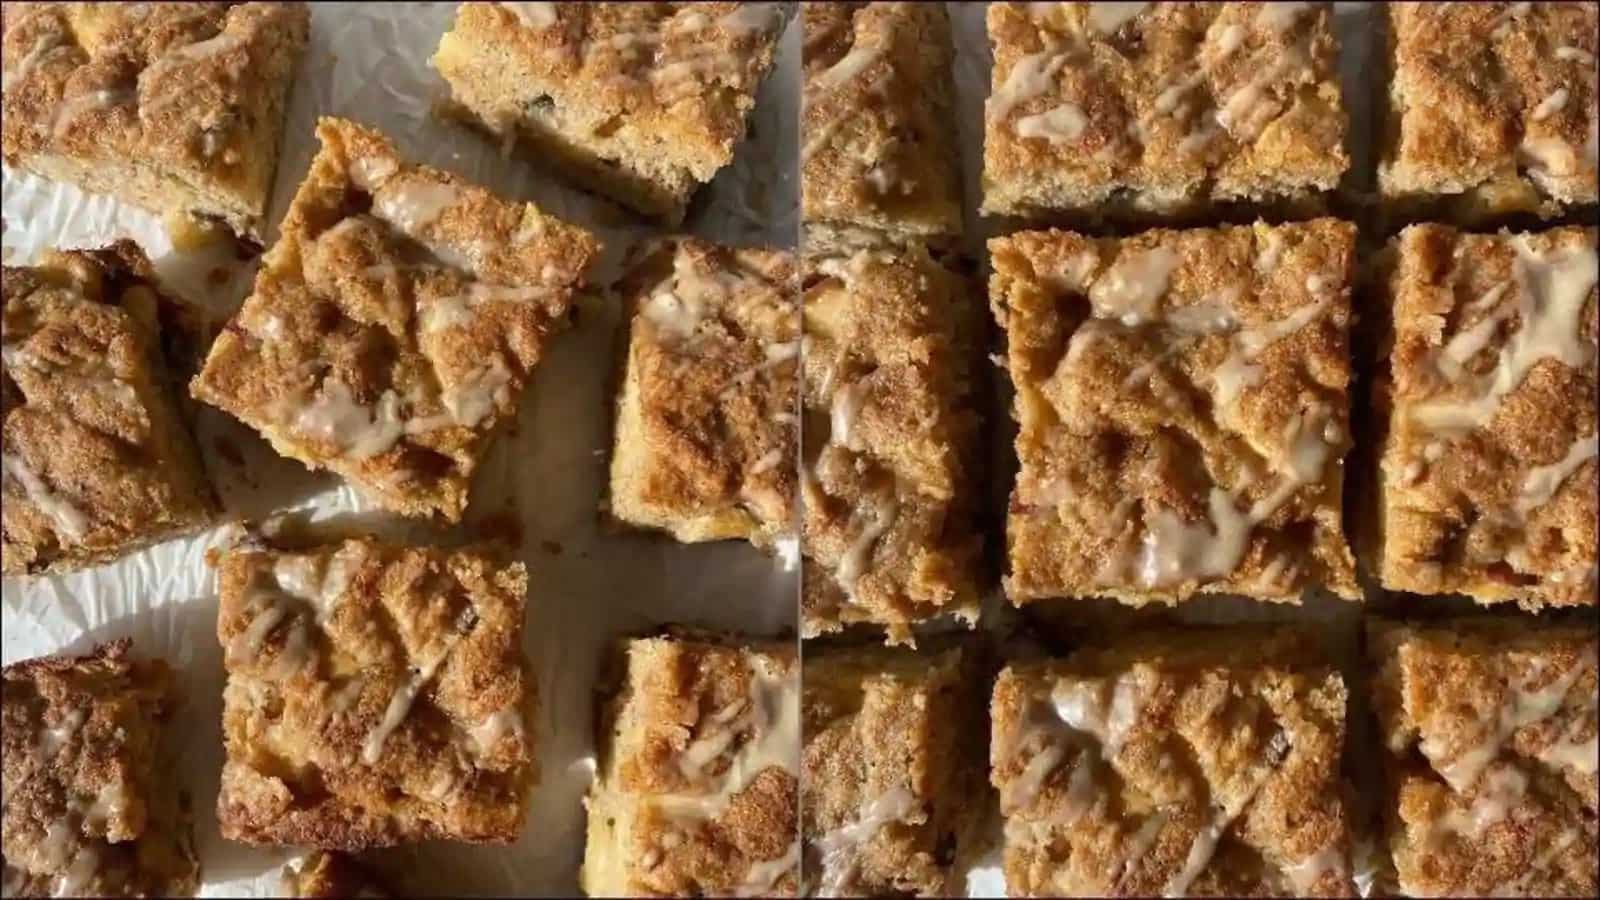 Recipe: In a mood for dessert? Try crisp and crunchy apple spice blondie bars